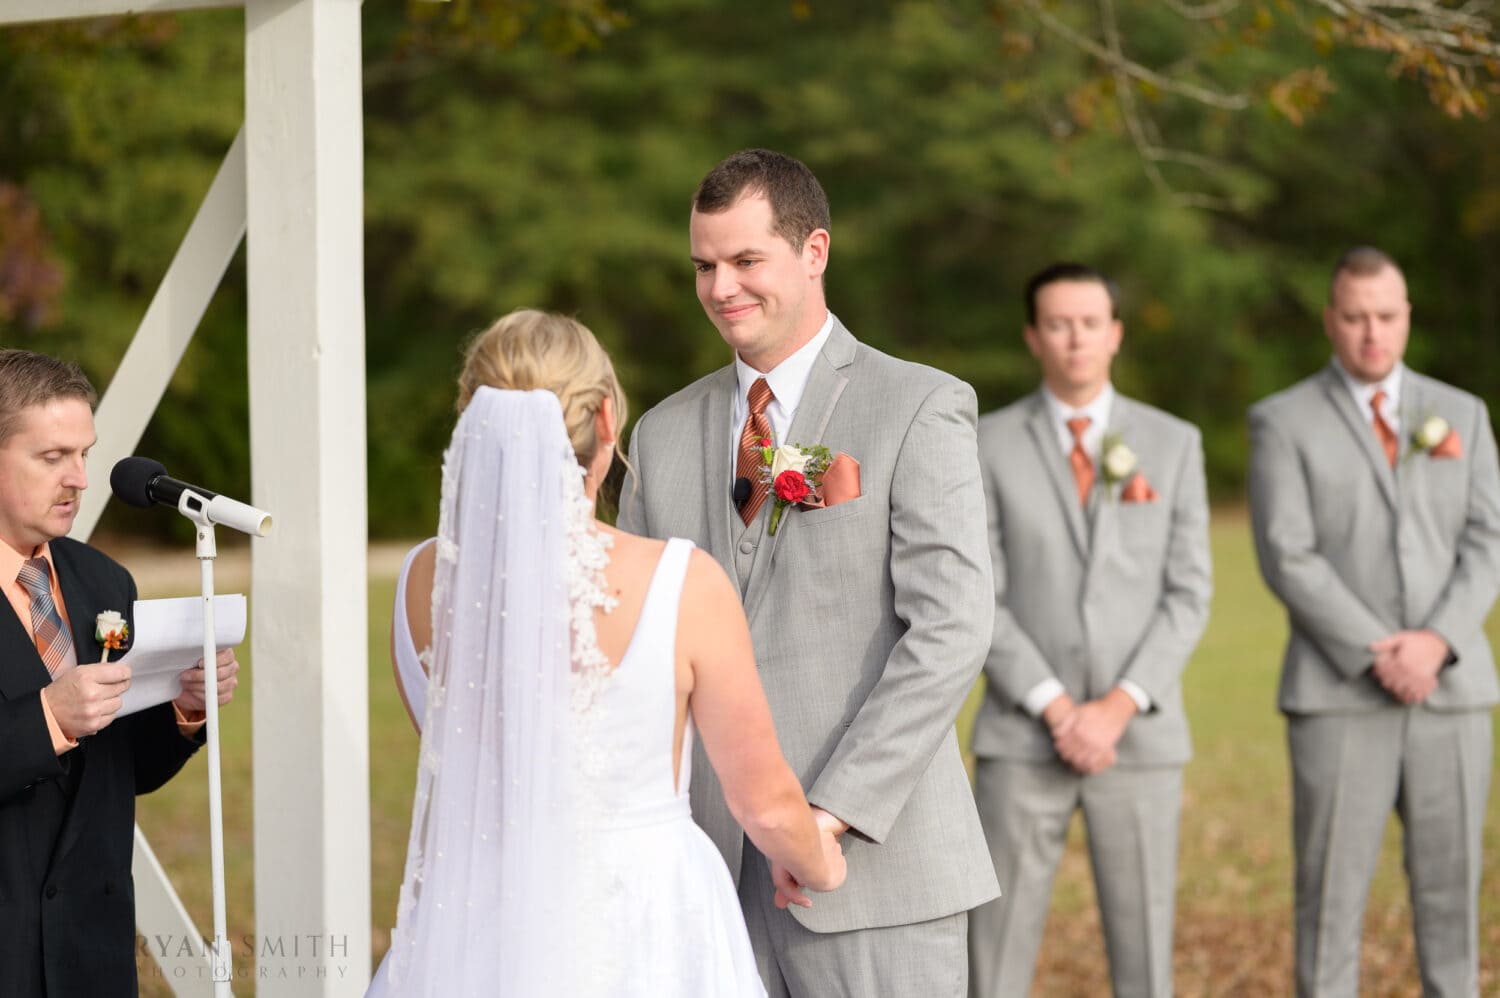 Vows with the bride and groom - The Blessed Barn